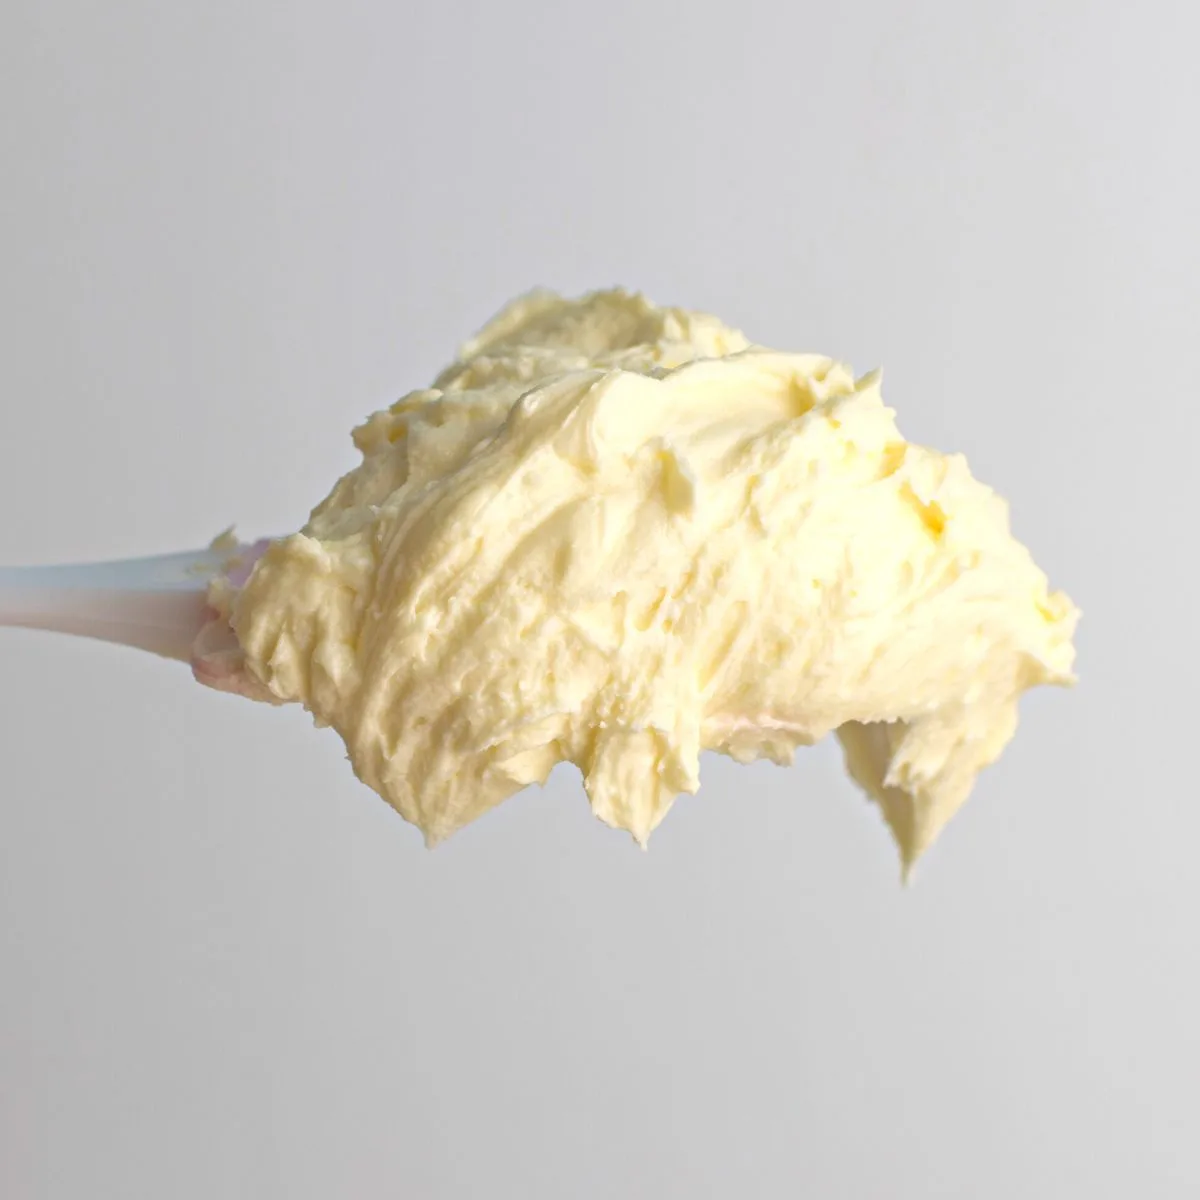 Champagne buttercream frosting on a spoon